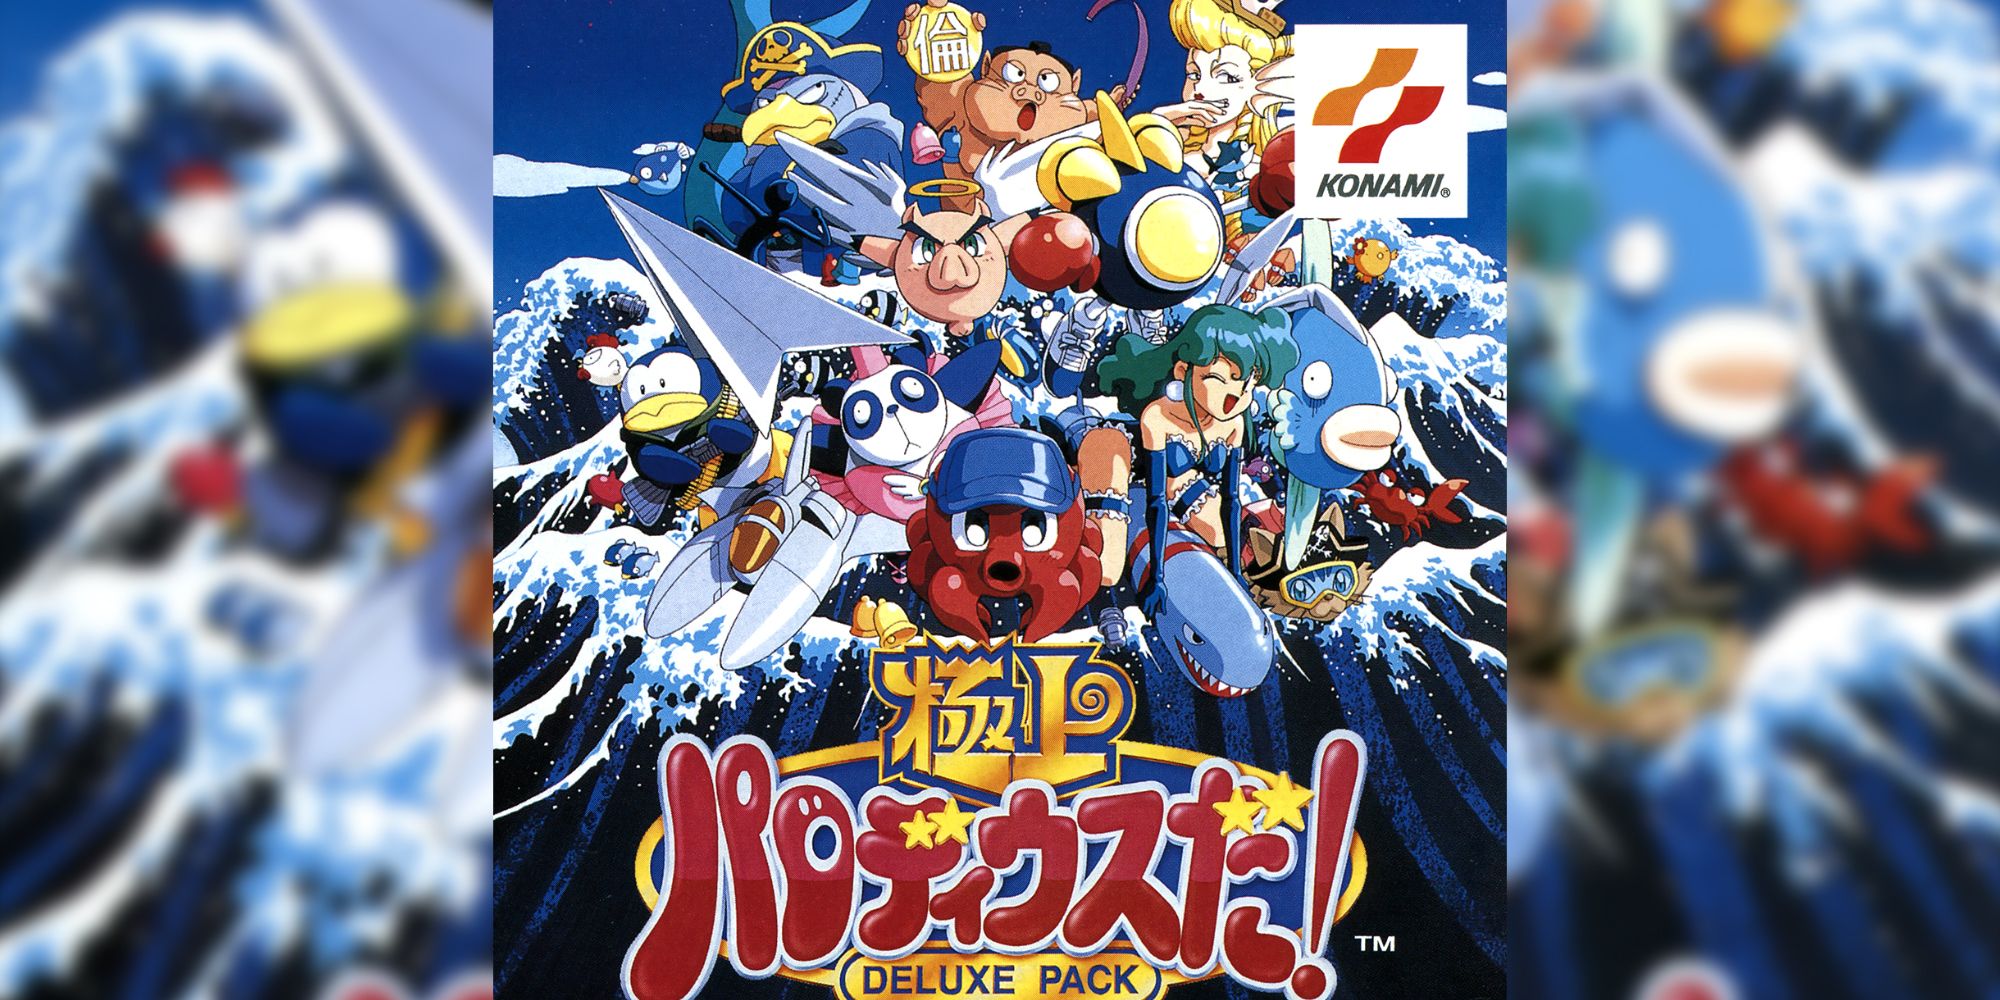 Image Showing The Cover Of A Parodius Double Pack Collection